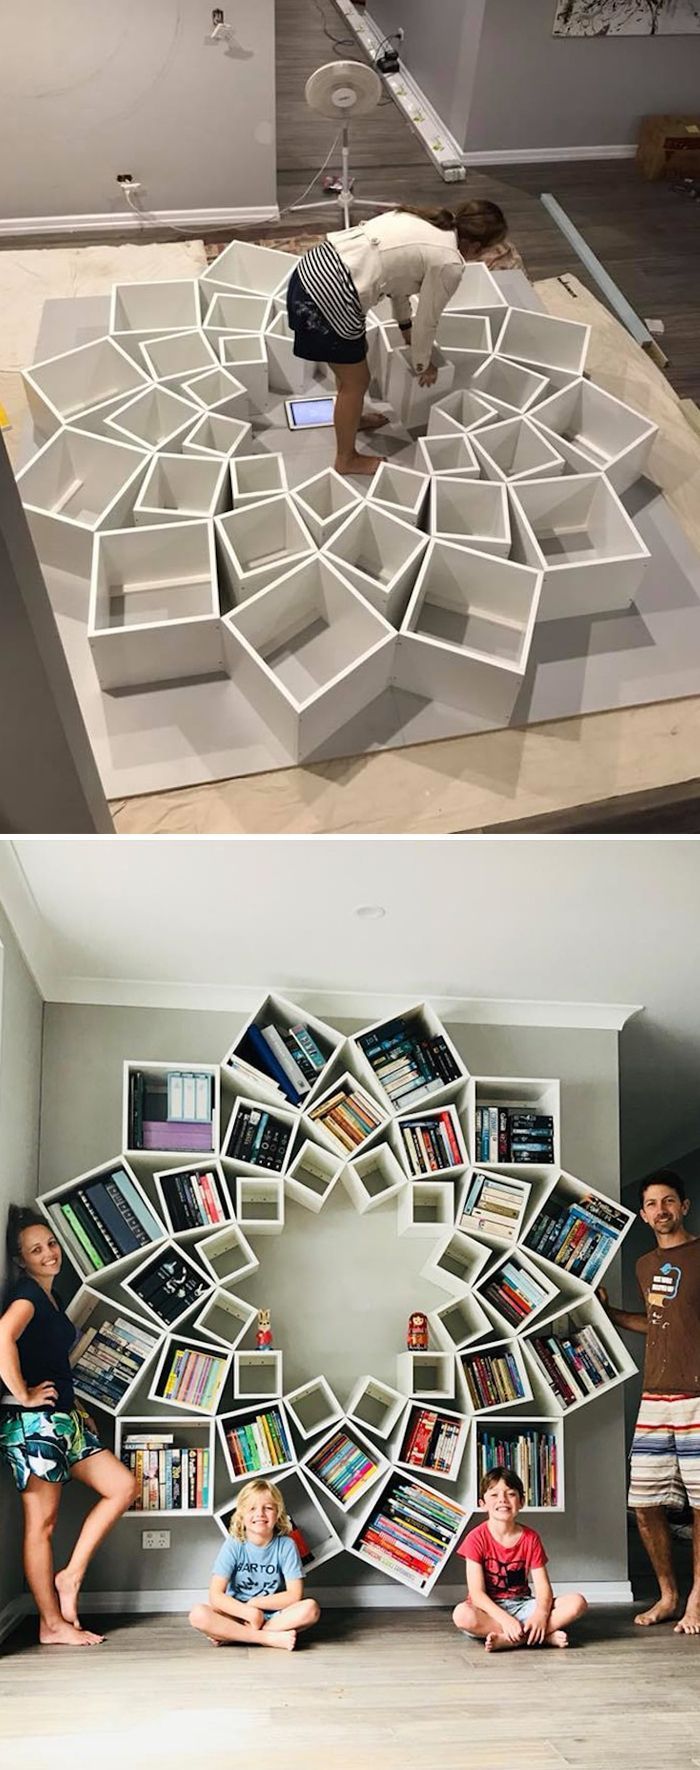 Couple Builds DIY Bookshelf Together and It’s a Pinterest Dream Come True